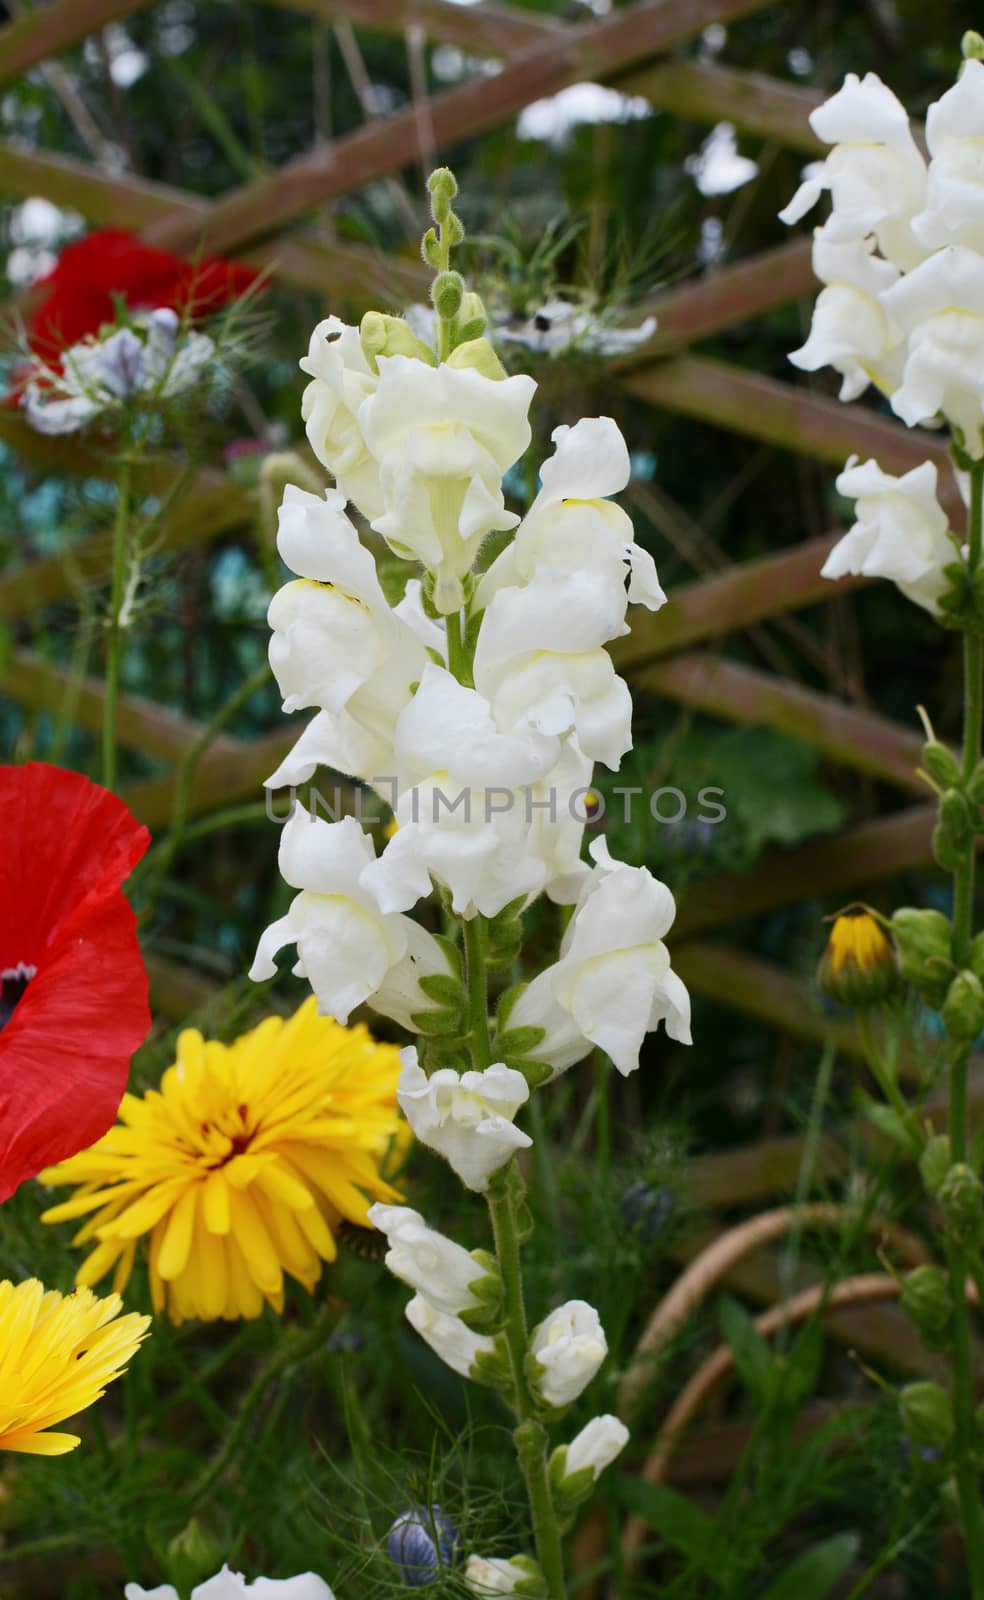 White snapdragon flowers, antirrhinum, growing in a flower bed among calendula and poppies